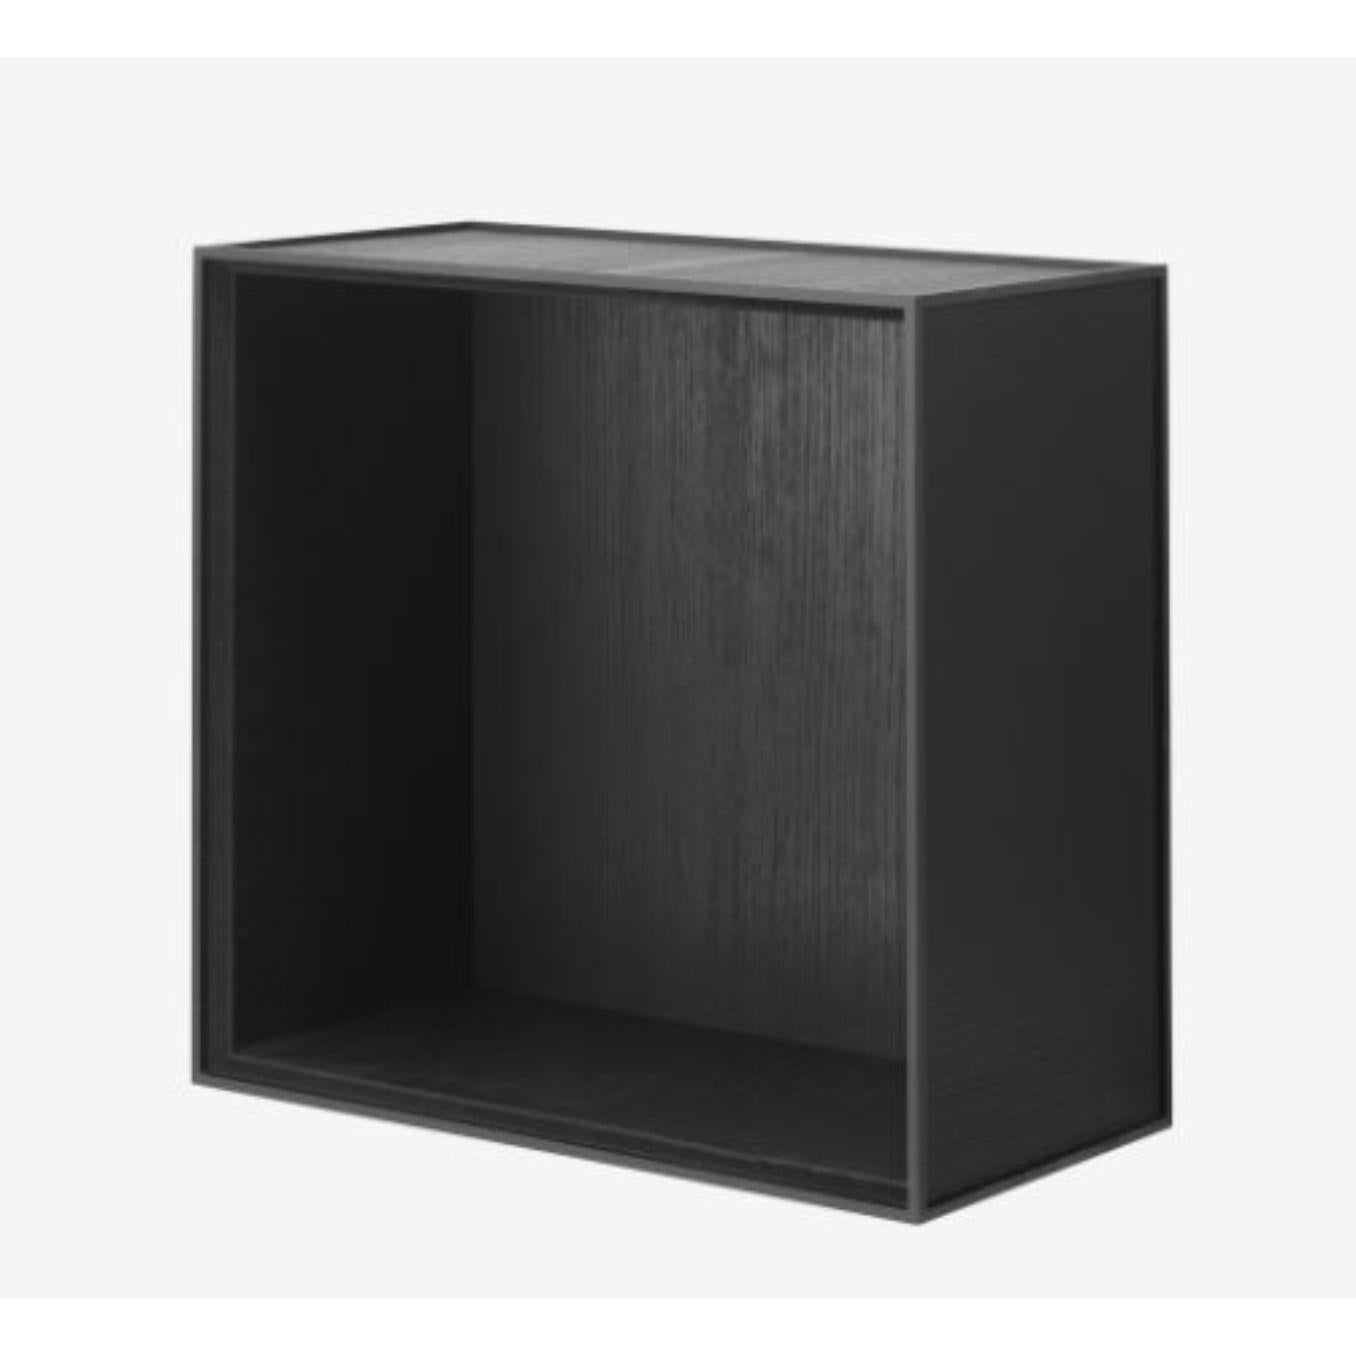 42 Black ash frame box by Lassen.
Dimensions: D 42 x W 21 x H 42 cm.
Materials: Finér, Melamin, Melamin, Melamine, metal, veneer, ash
Also available in different colours and dimensions. 
Weight: 10.5 Kg


By Lassen is a Danish design brand